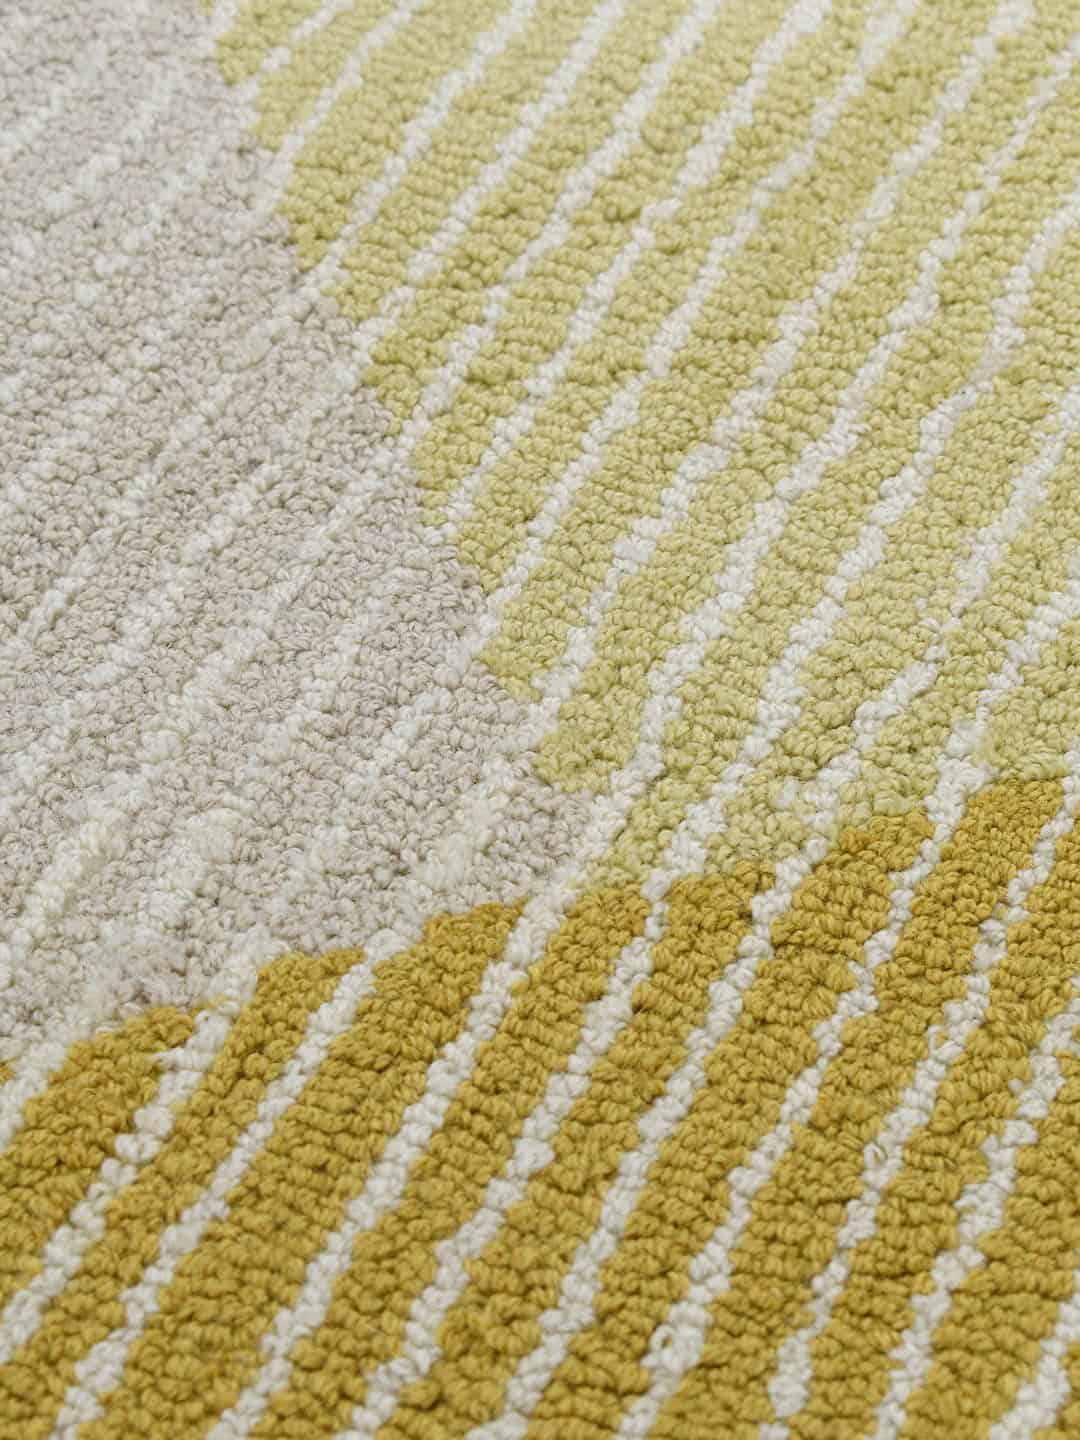 Pinstripe-citrus-yellow-OH-stans-rug-centre-wool-loop pile